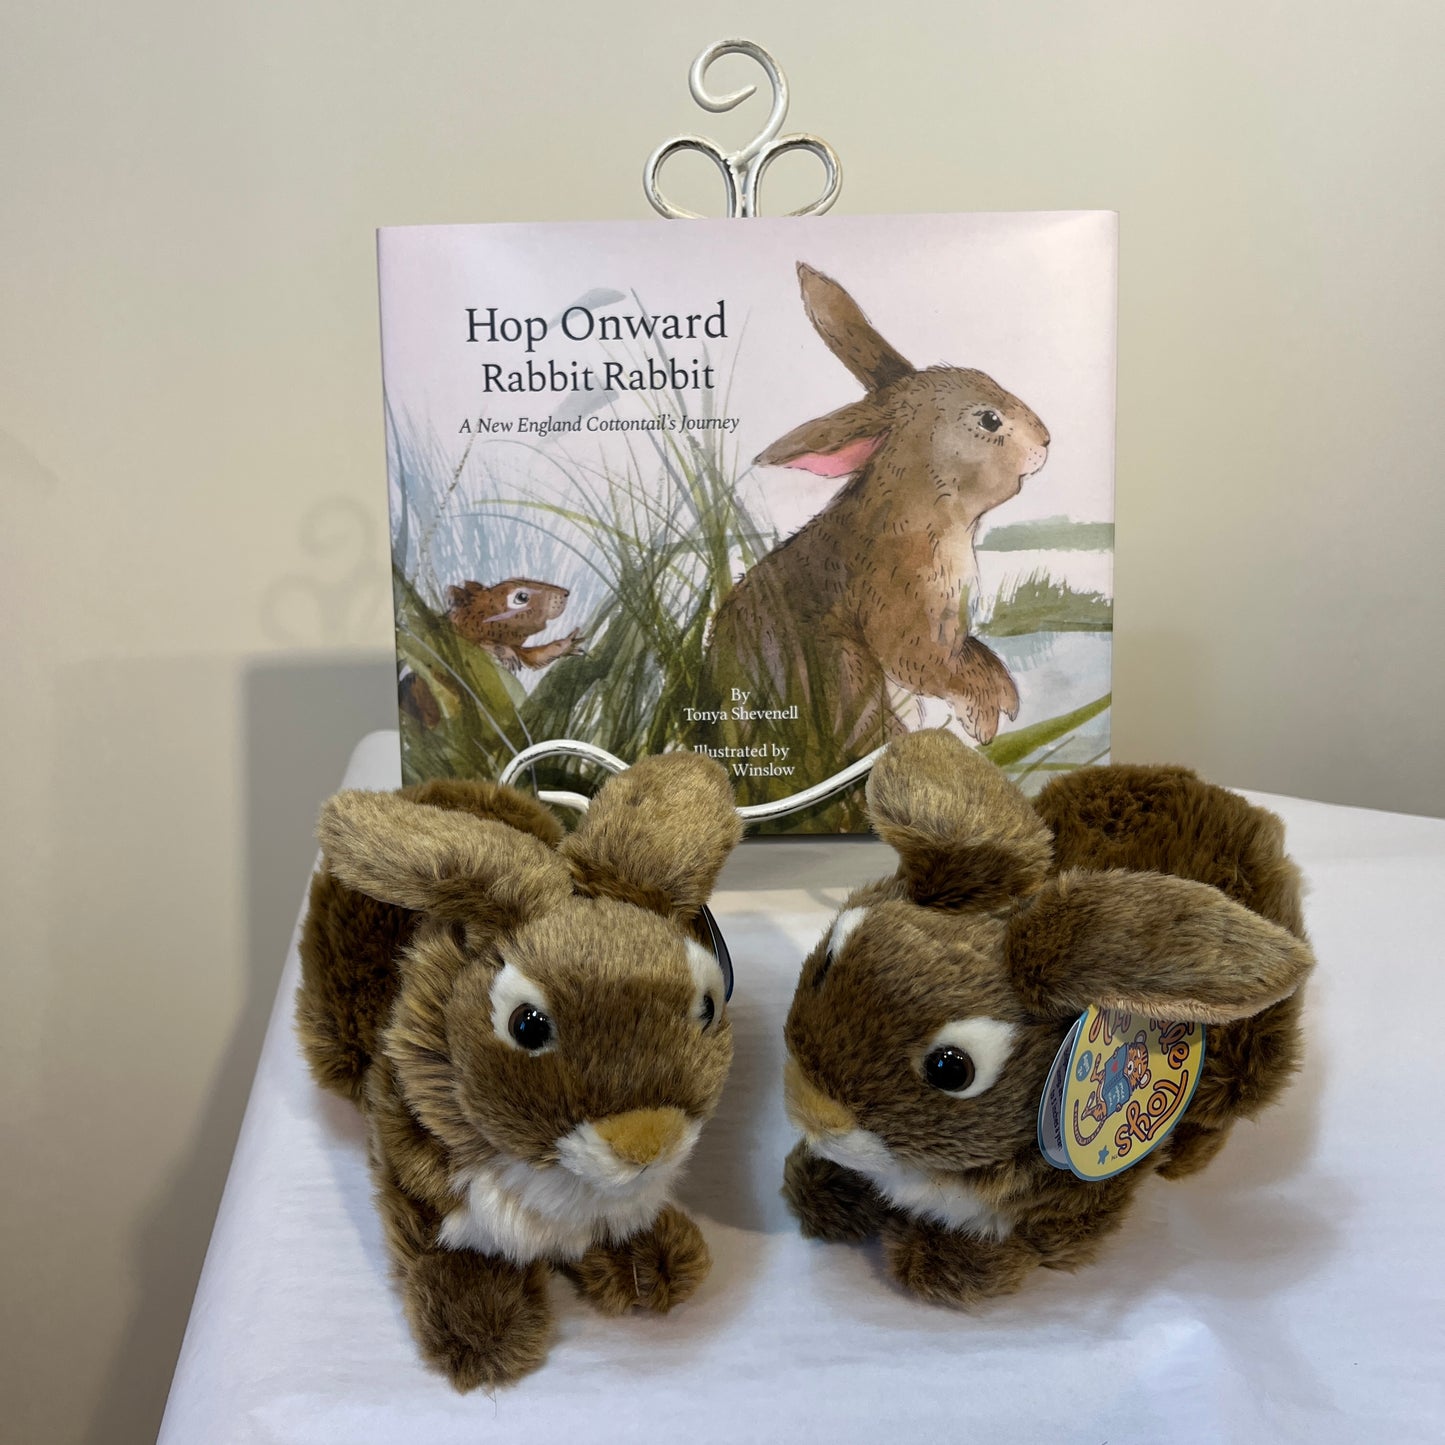 The book and bunny (cottontail) bundle! Hop Onward Rabbit Rabbit: A New England Cottontail's Journey